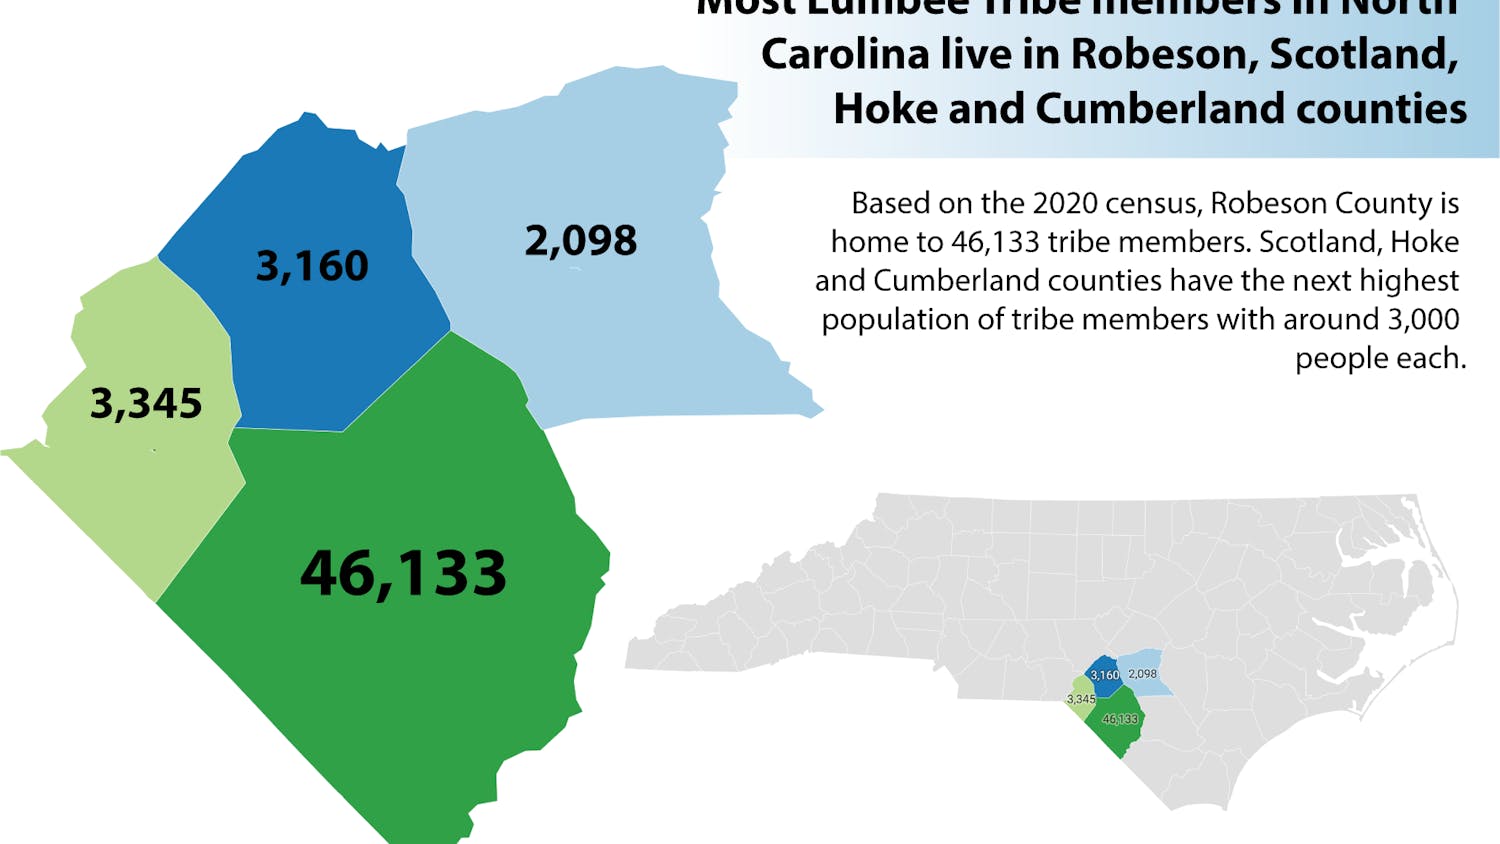 Most Lumbee Tribe members in North Carolina live in Robeson, Scotland, Hoke and Cumberland counties